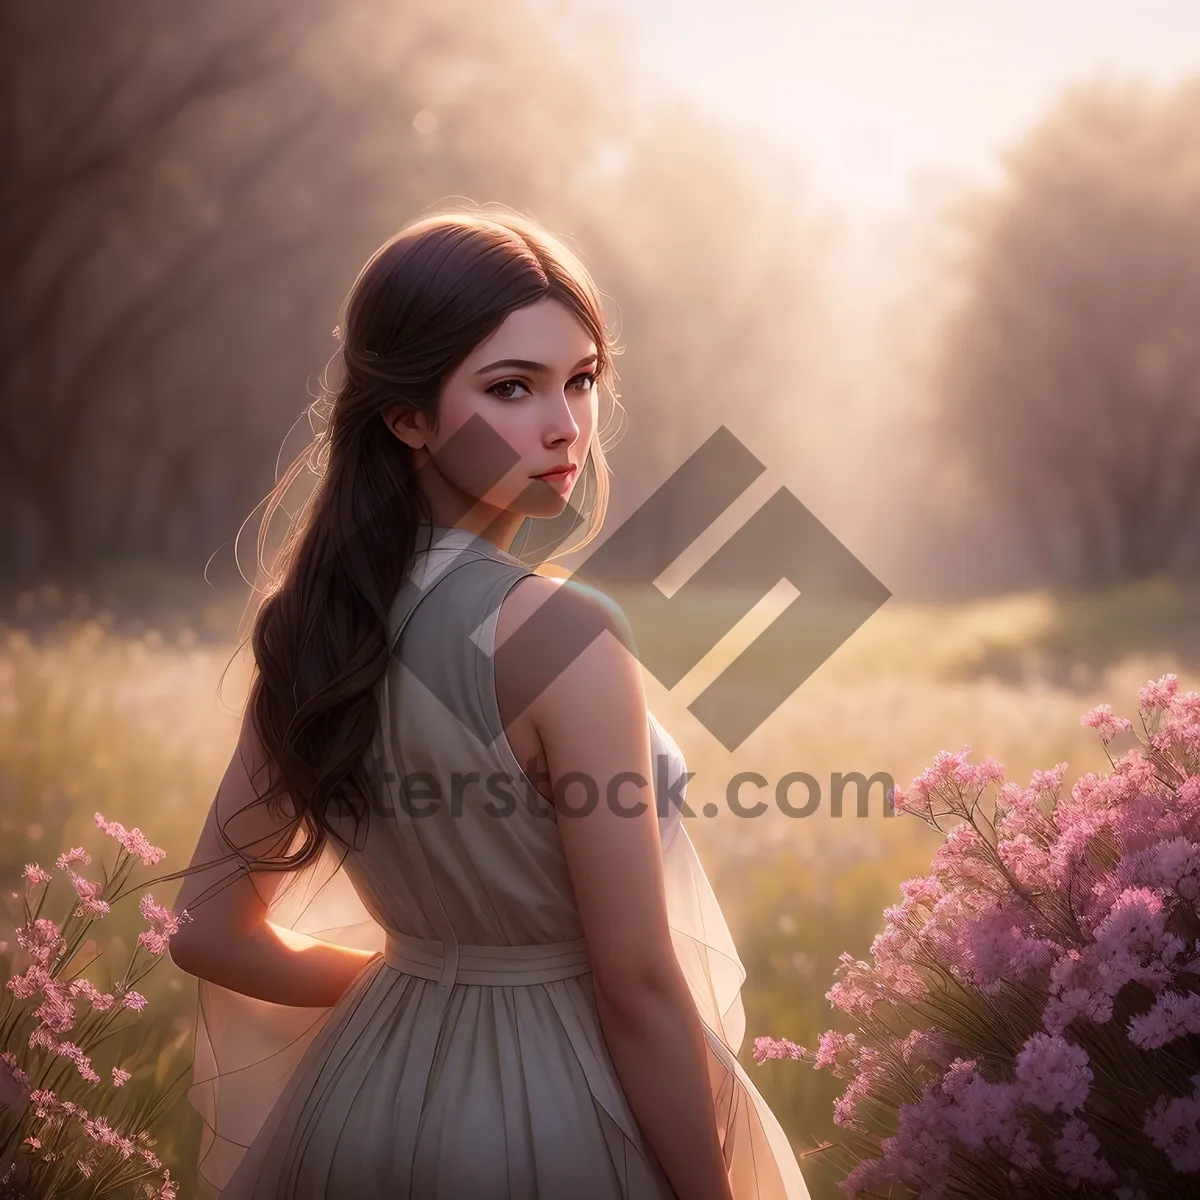 Picture of Beaming Beauty in Summer Fashion - Outdoor Portrait